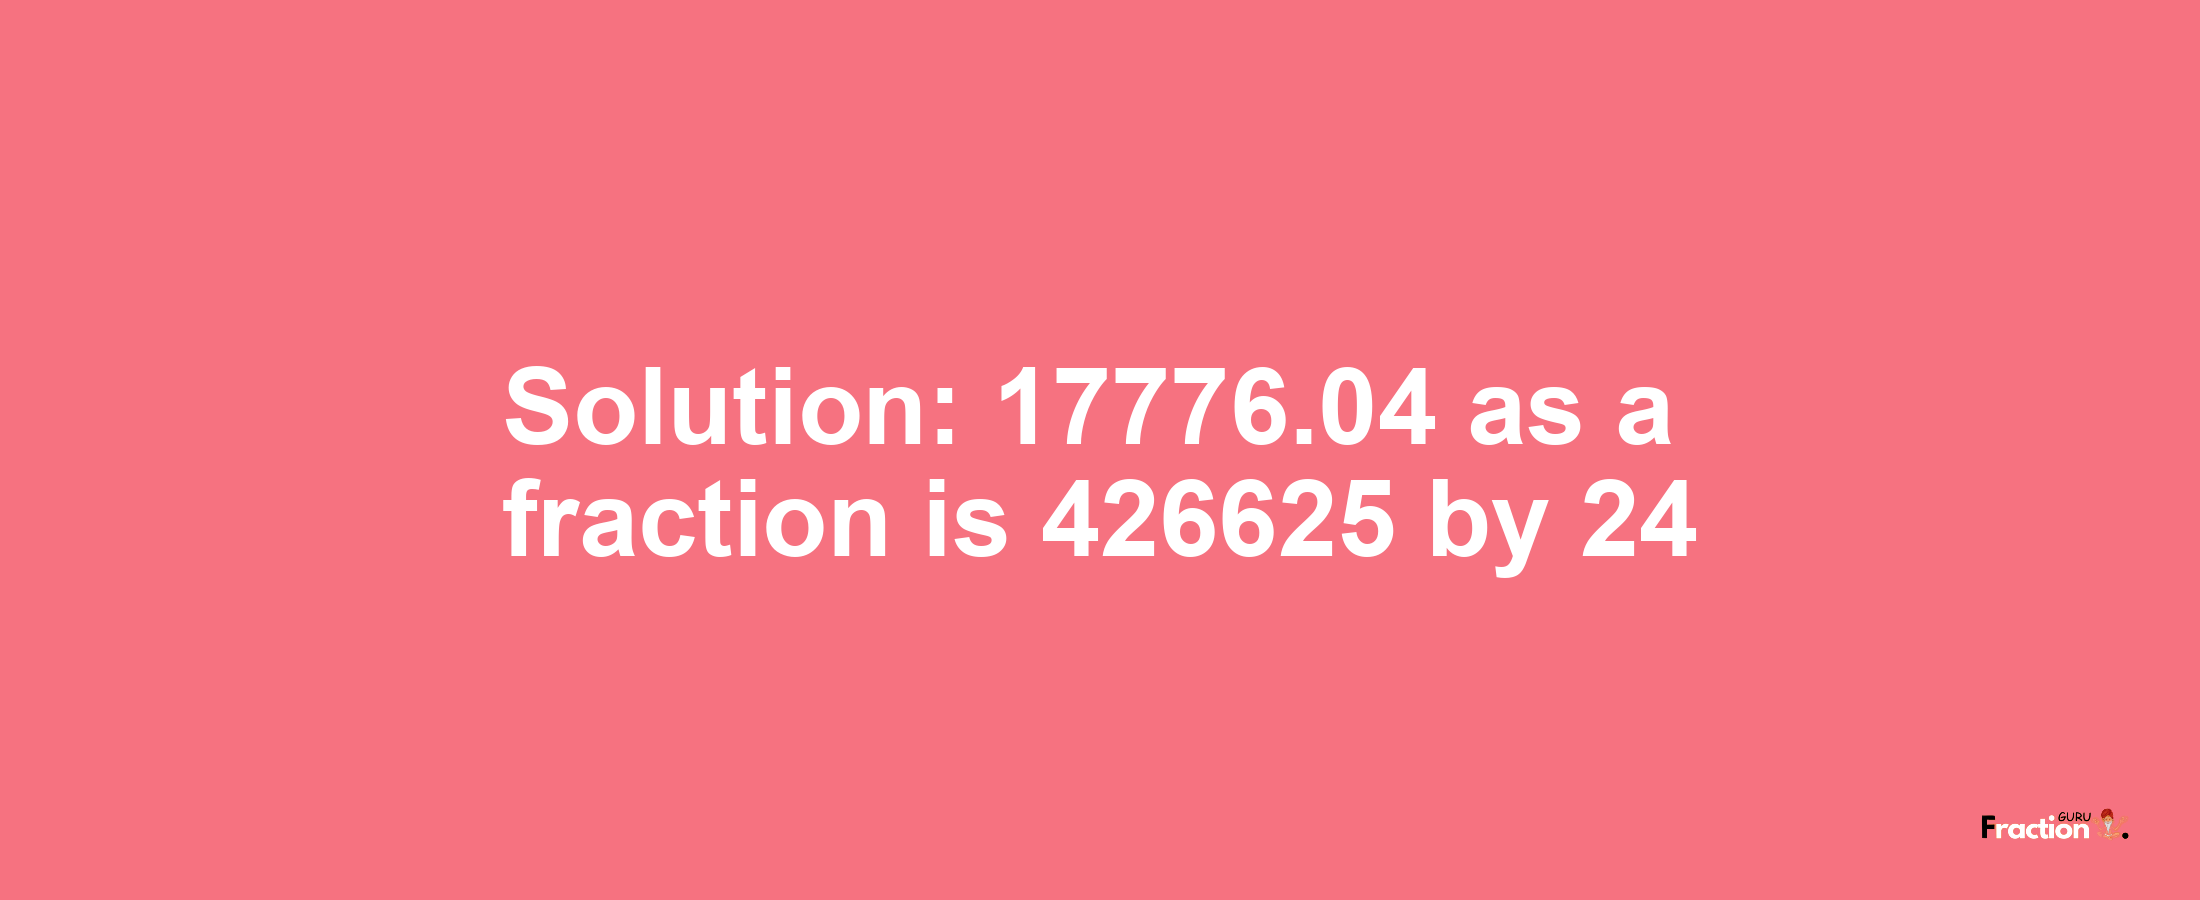 Solution:17776.04 as a fraction is 426625/24